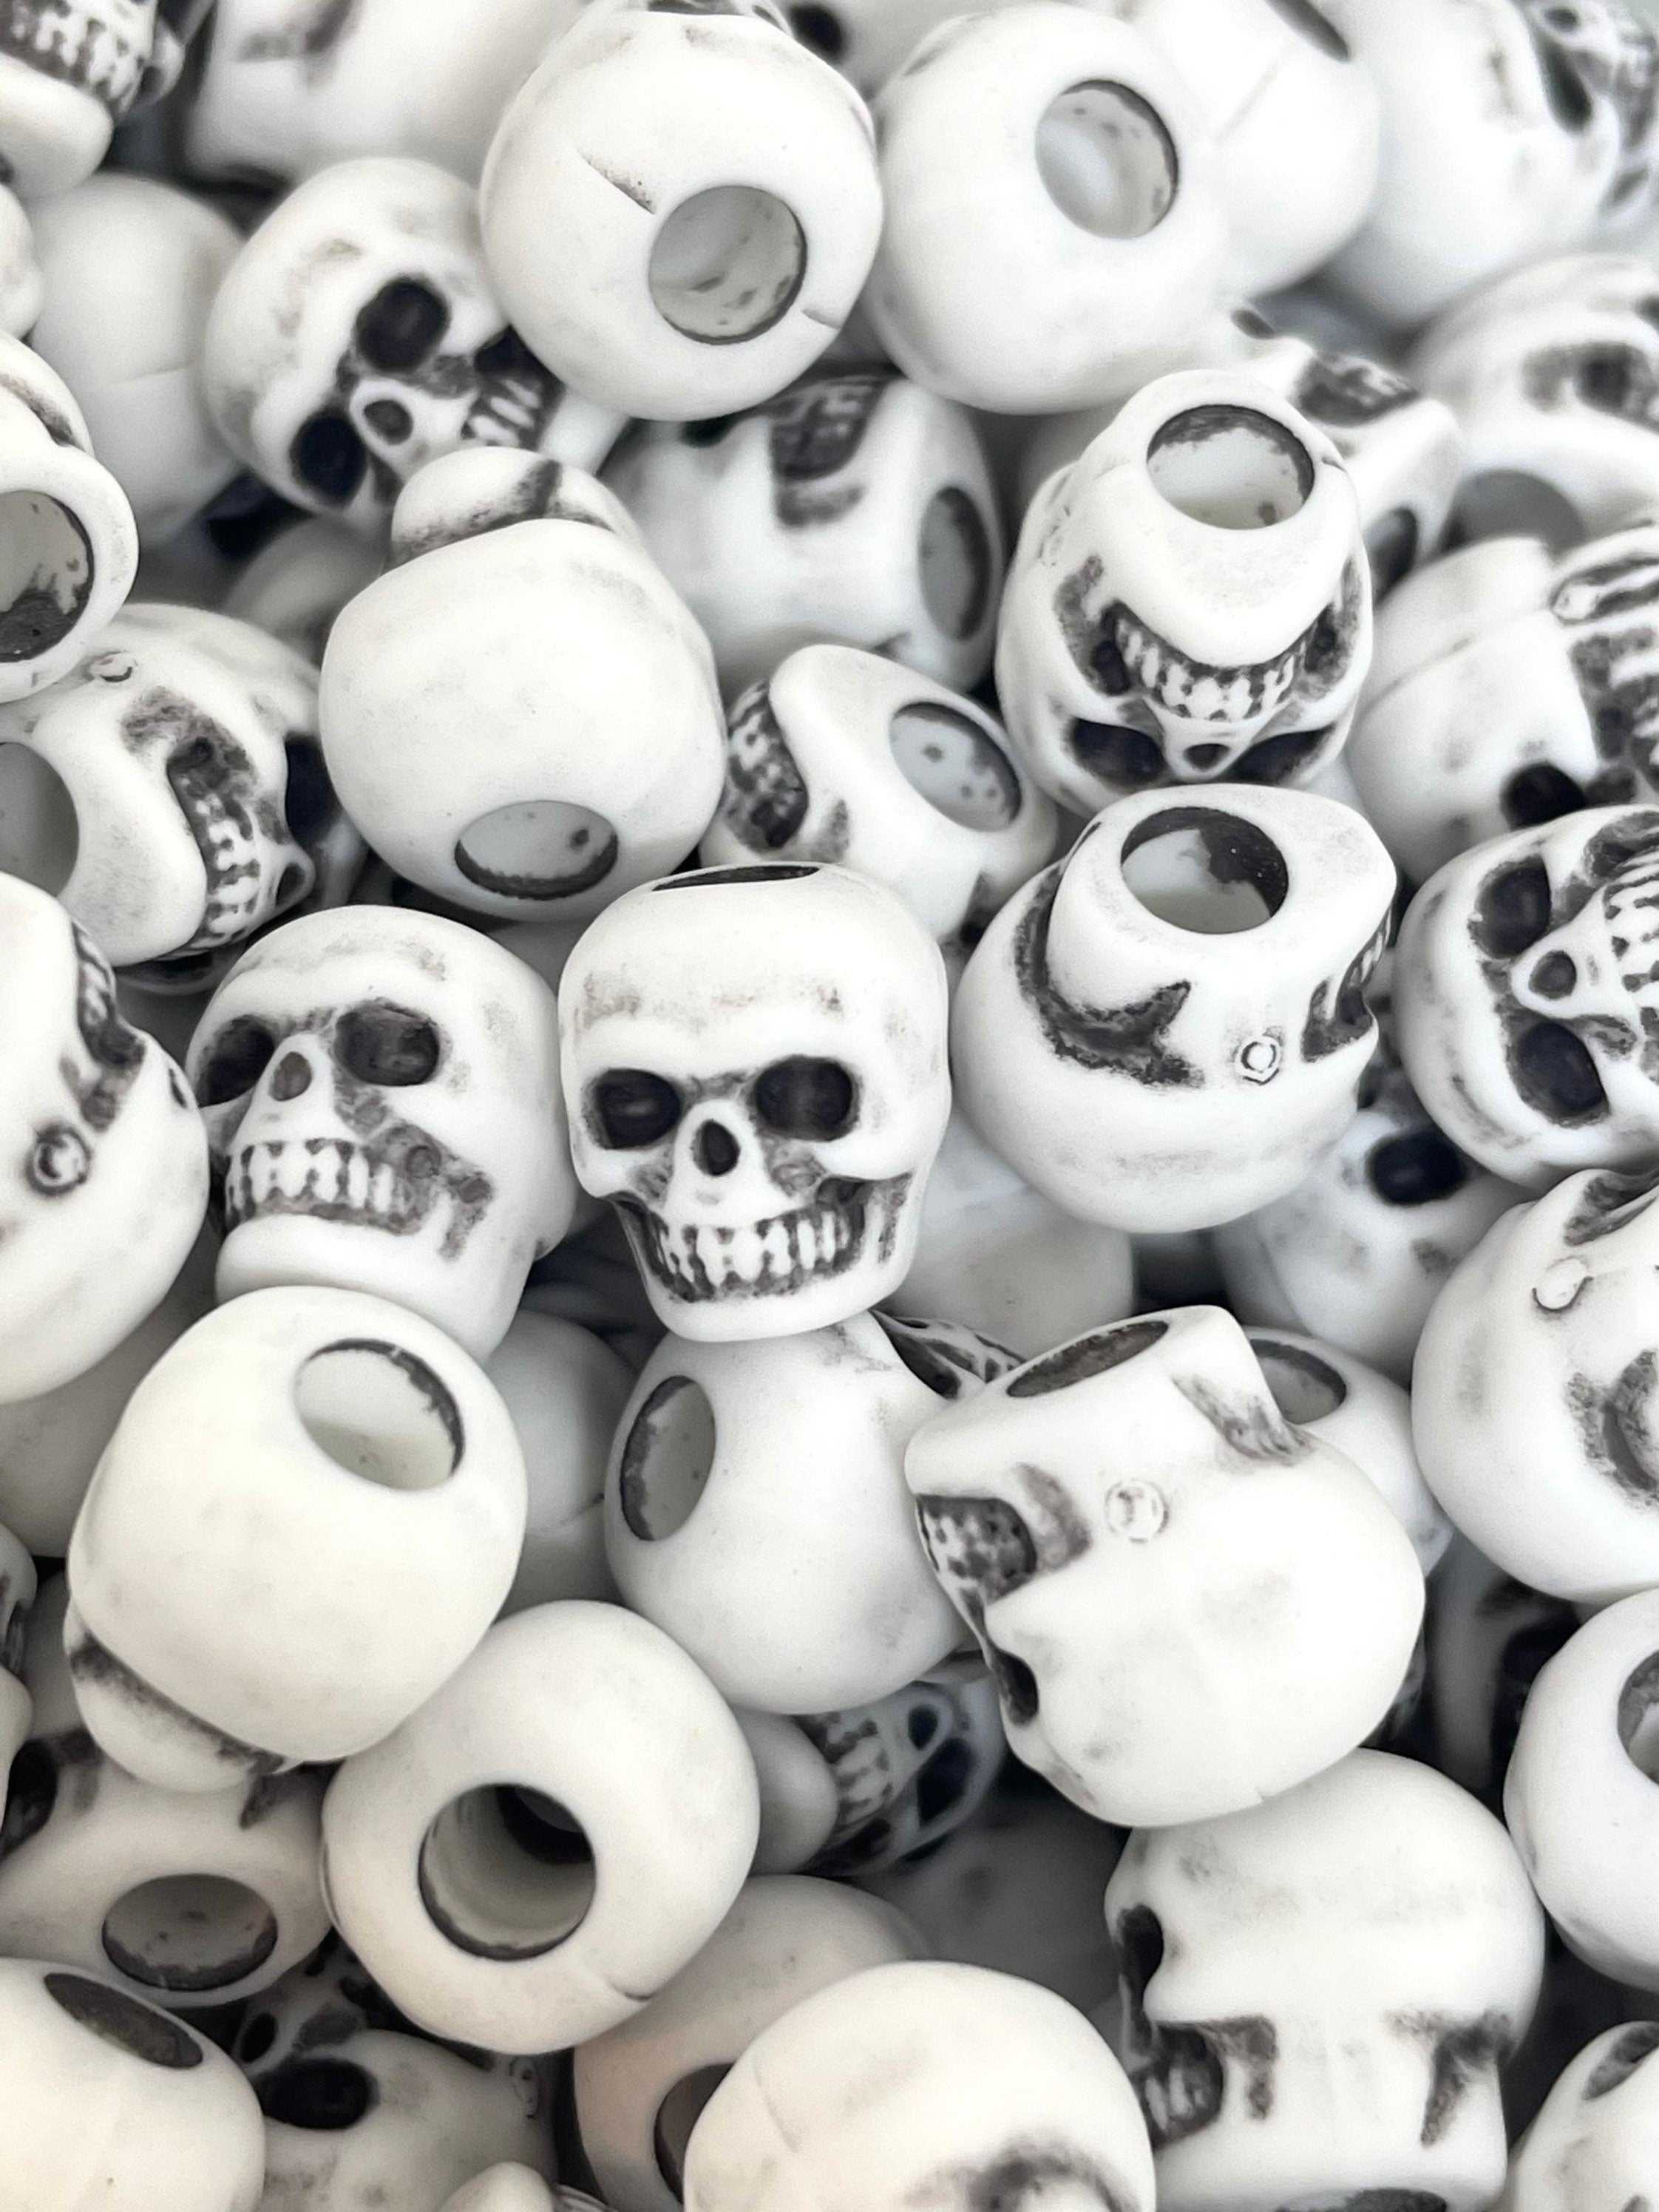 Spooky White Skull Beads for Halloween, Gothic Jewelry, Gothic Lolita, Skeleton Beads, Charms